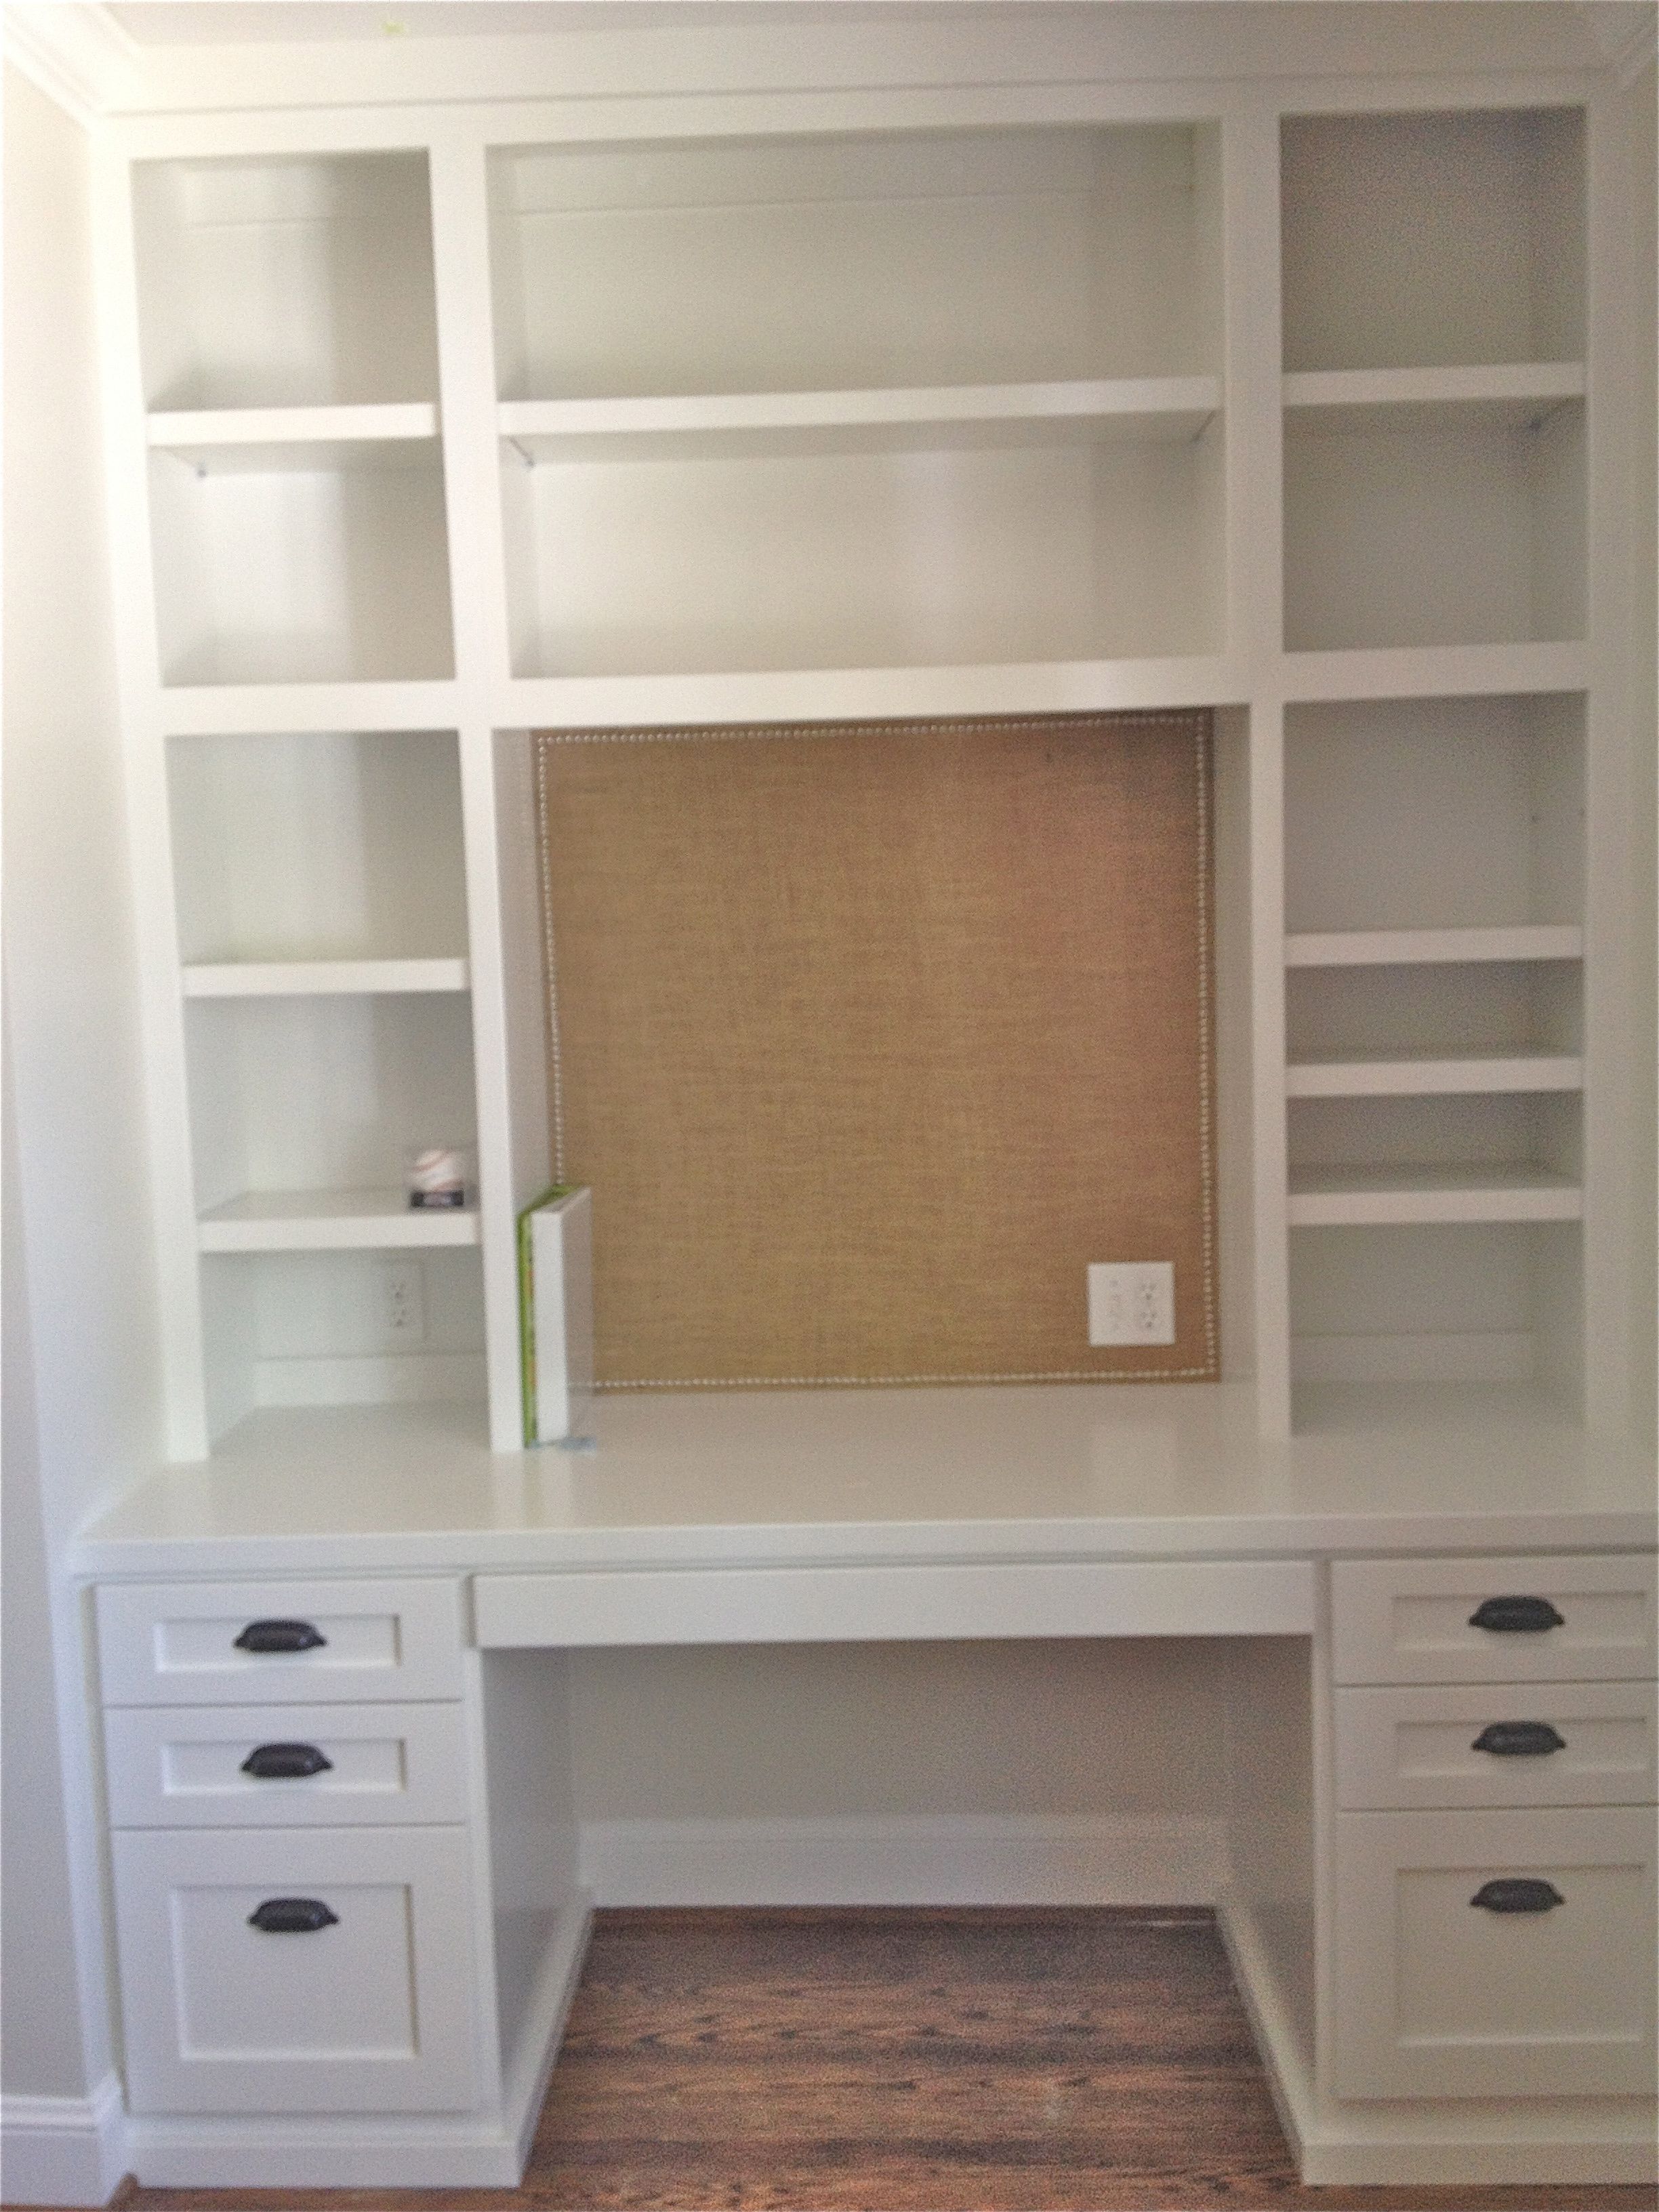 Desks, Room And Walls Pertaining To Latest Desktop Bookcases (View 8 of 15)